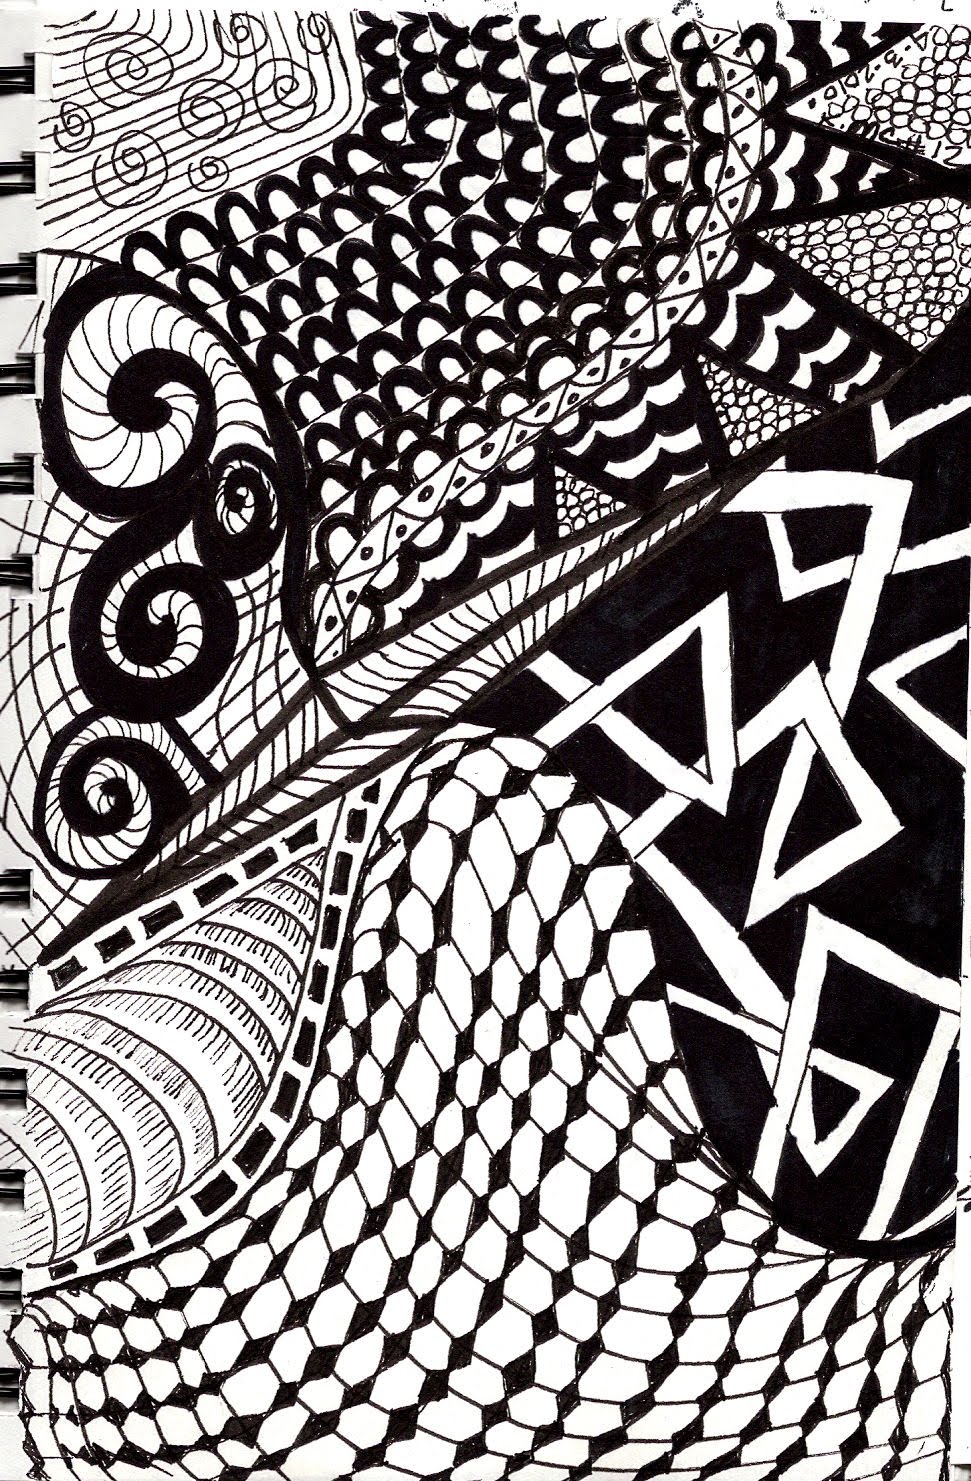 giddy up let's ride: zentangle-2010 #12